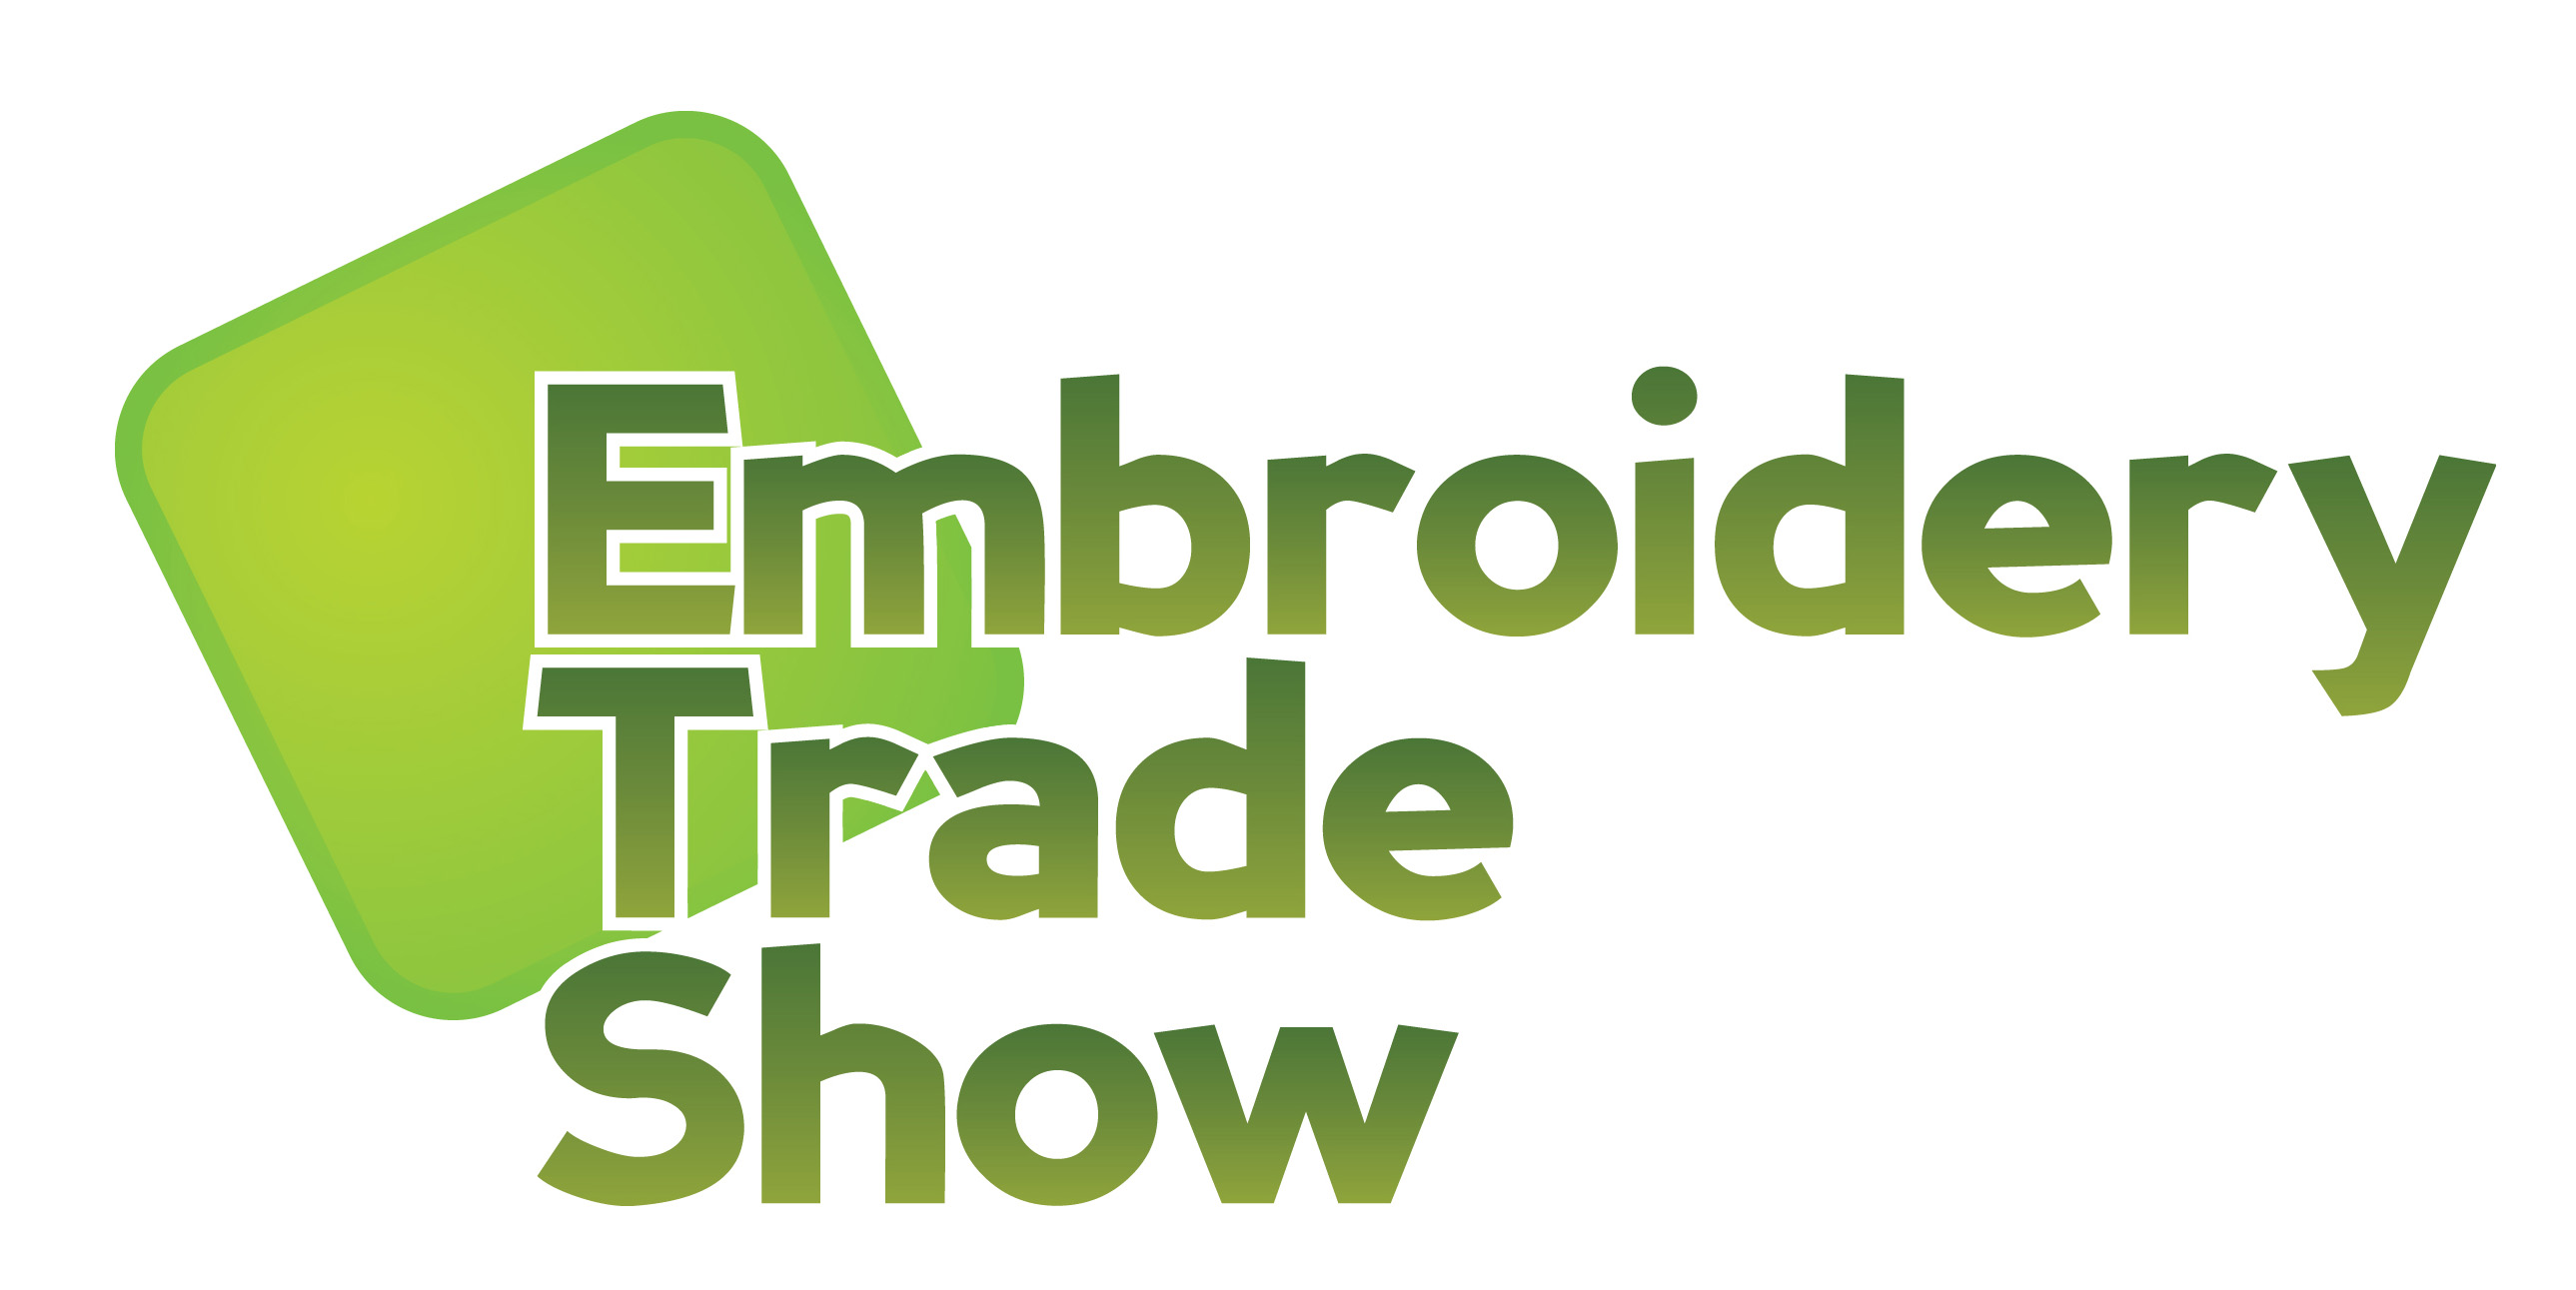 Embroidery Trade Show logo National Network of Embroidery Professionals